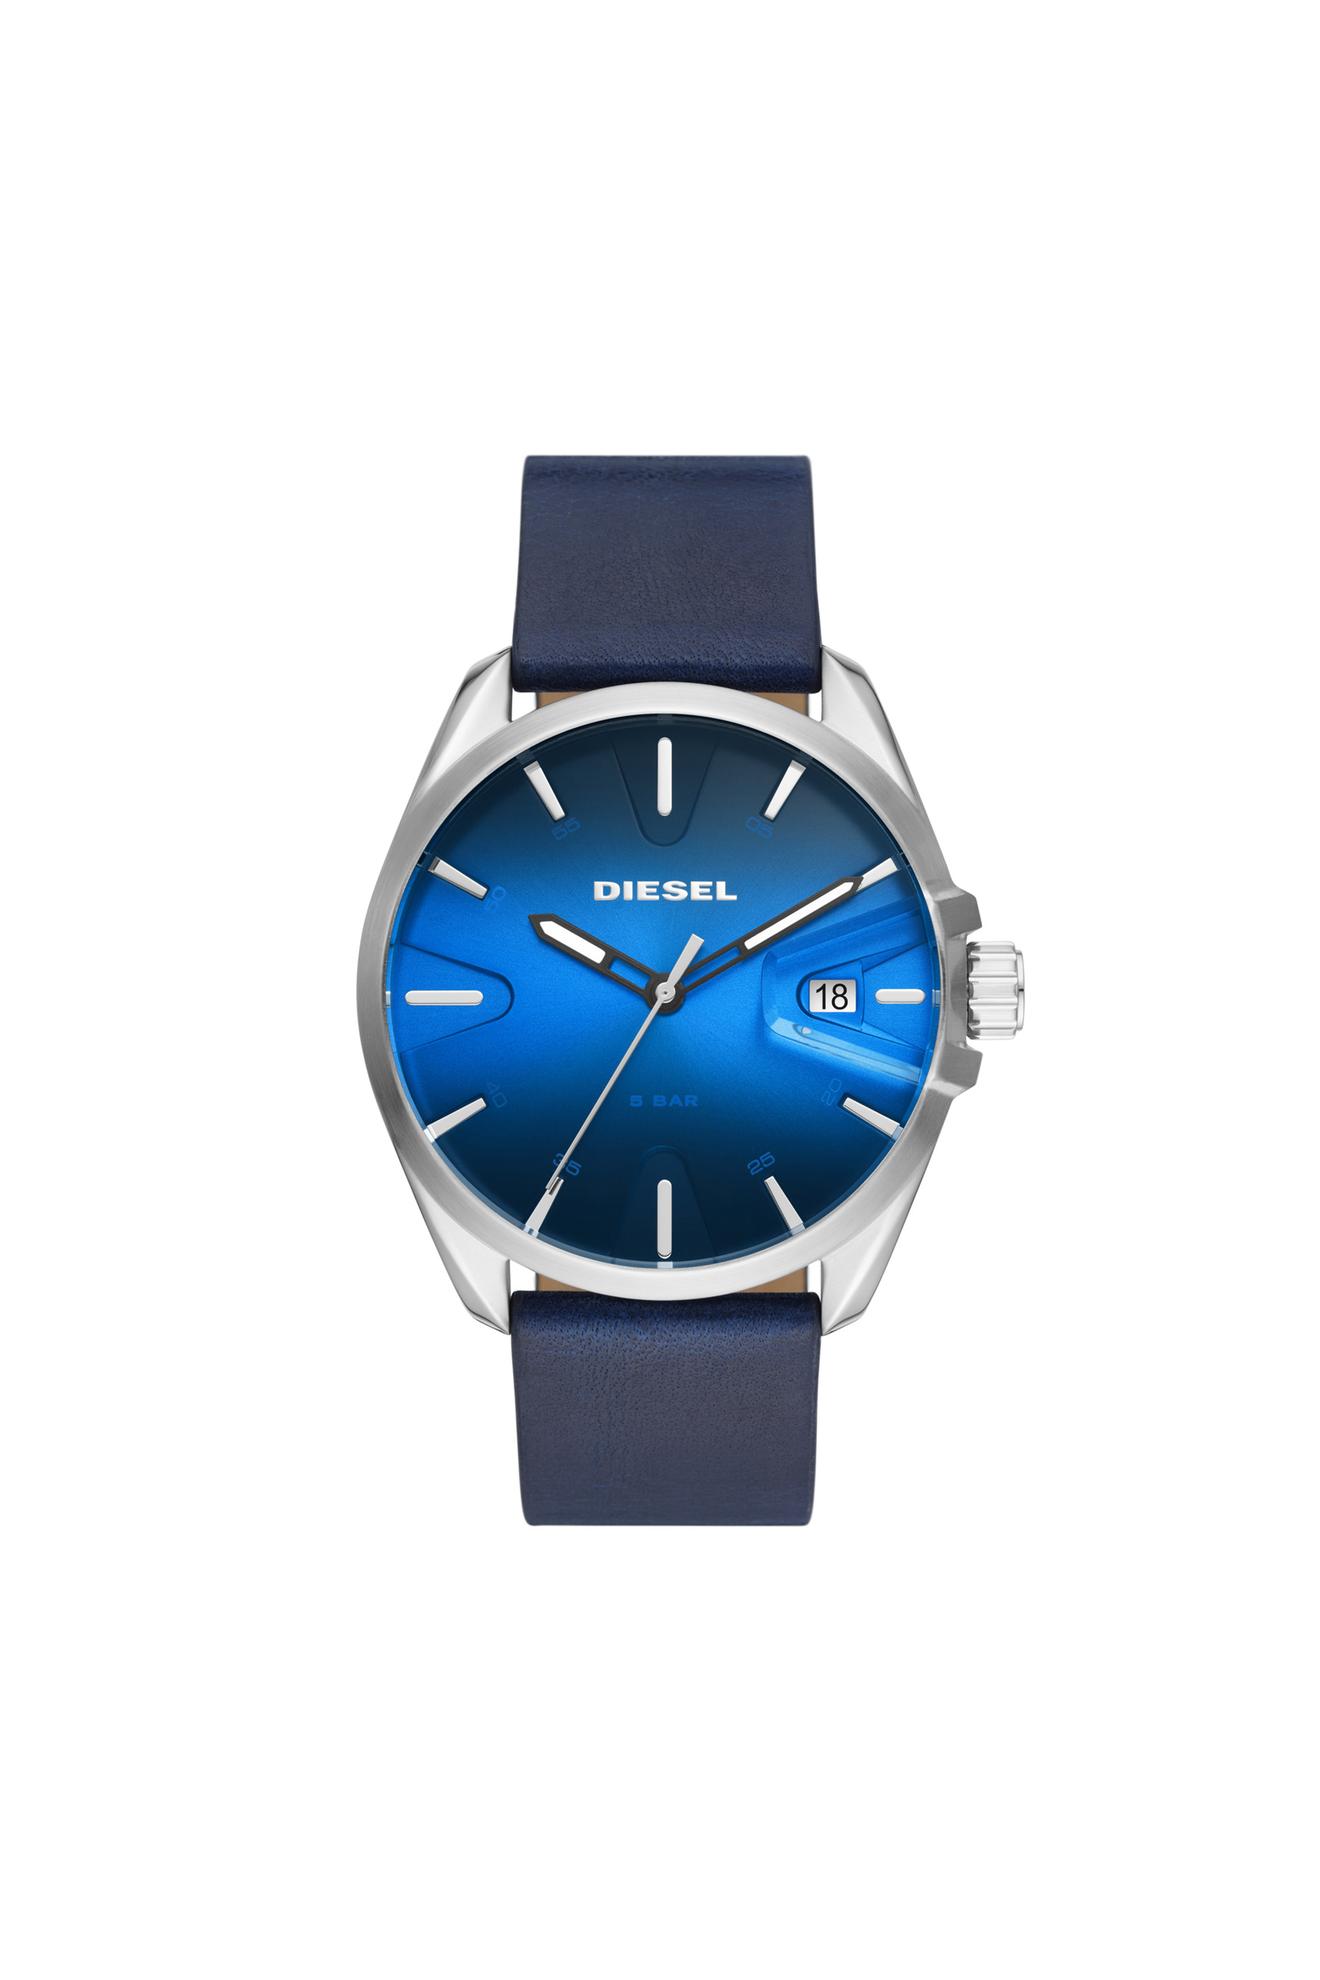 MS9 three-hand date blue Leather watch offers at $213 in Diesel